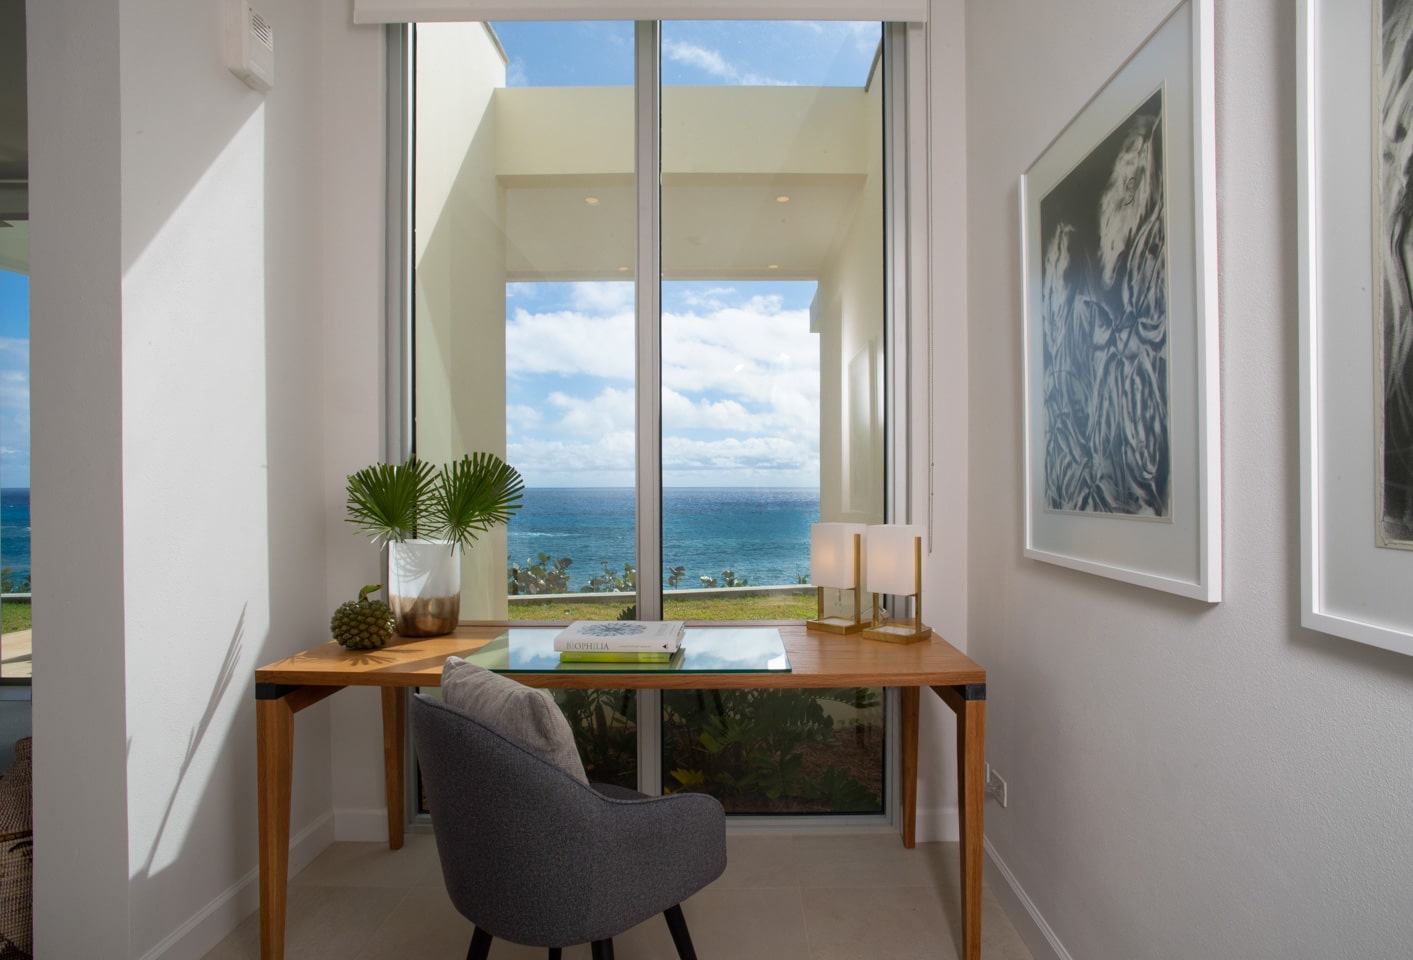 A desk in front of tall windows showing an ocean view.